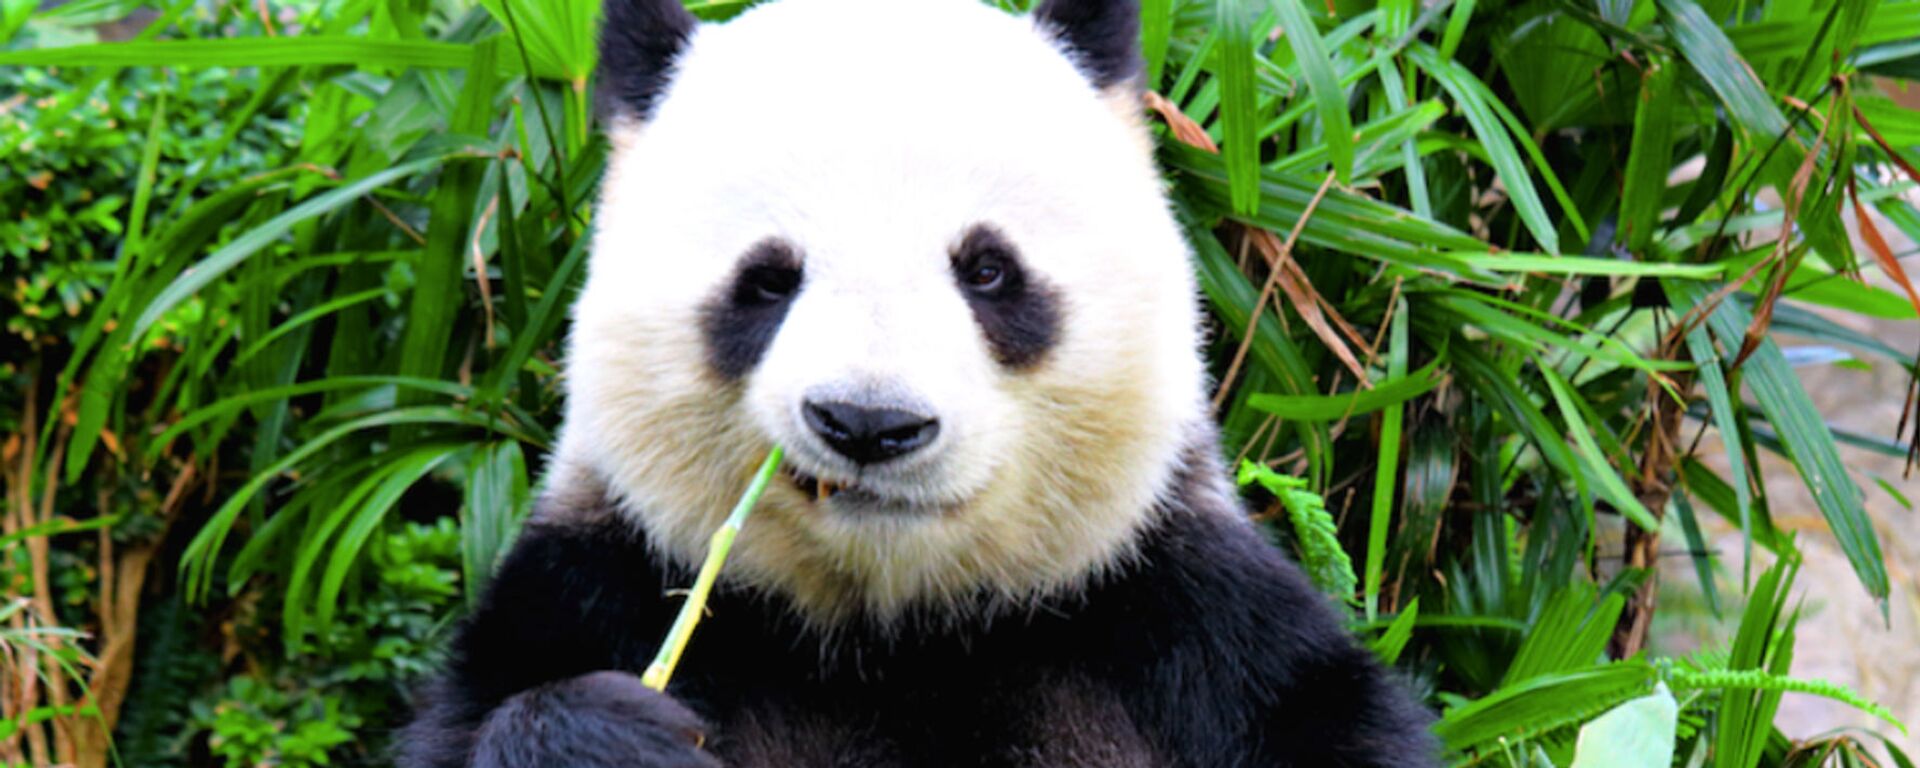 Canadian Zoo Sends Pandas Home to China After Pandemic Frustrates Bamboo Imports - Sputnik International, 1920, 08.08.2023